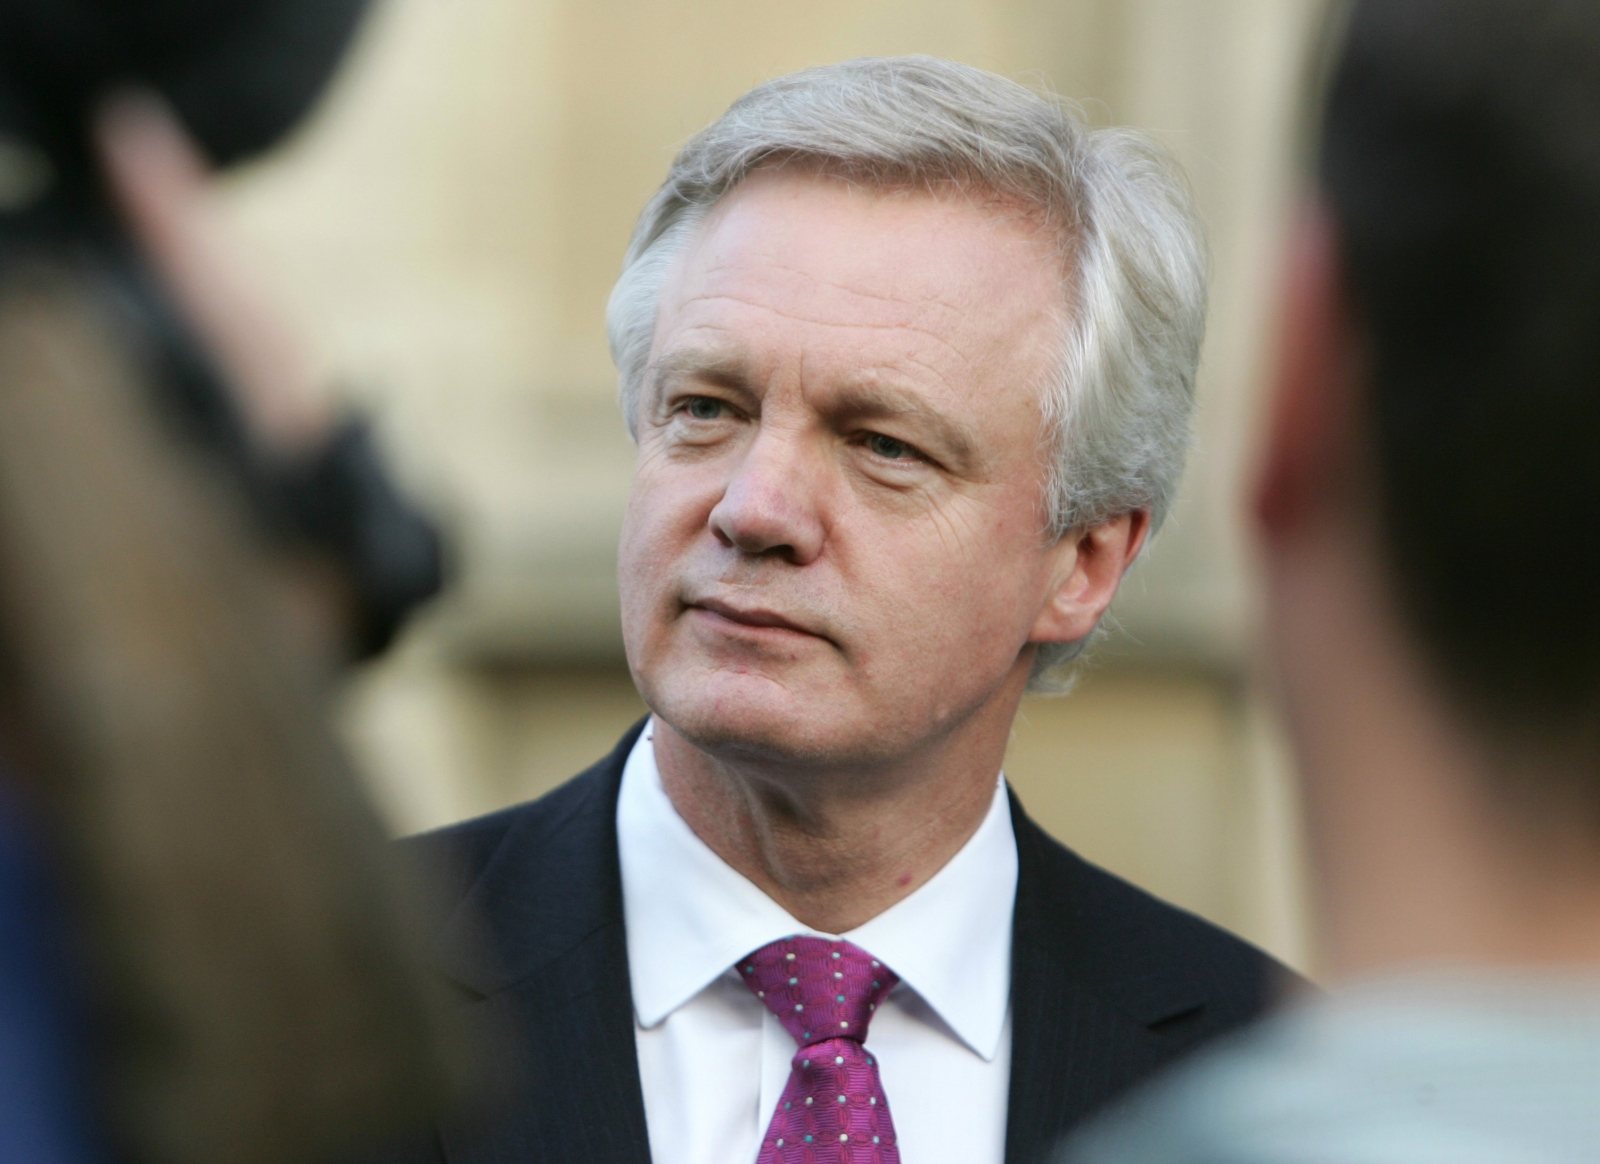 David Davis will be in charge of negotiating the UK